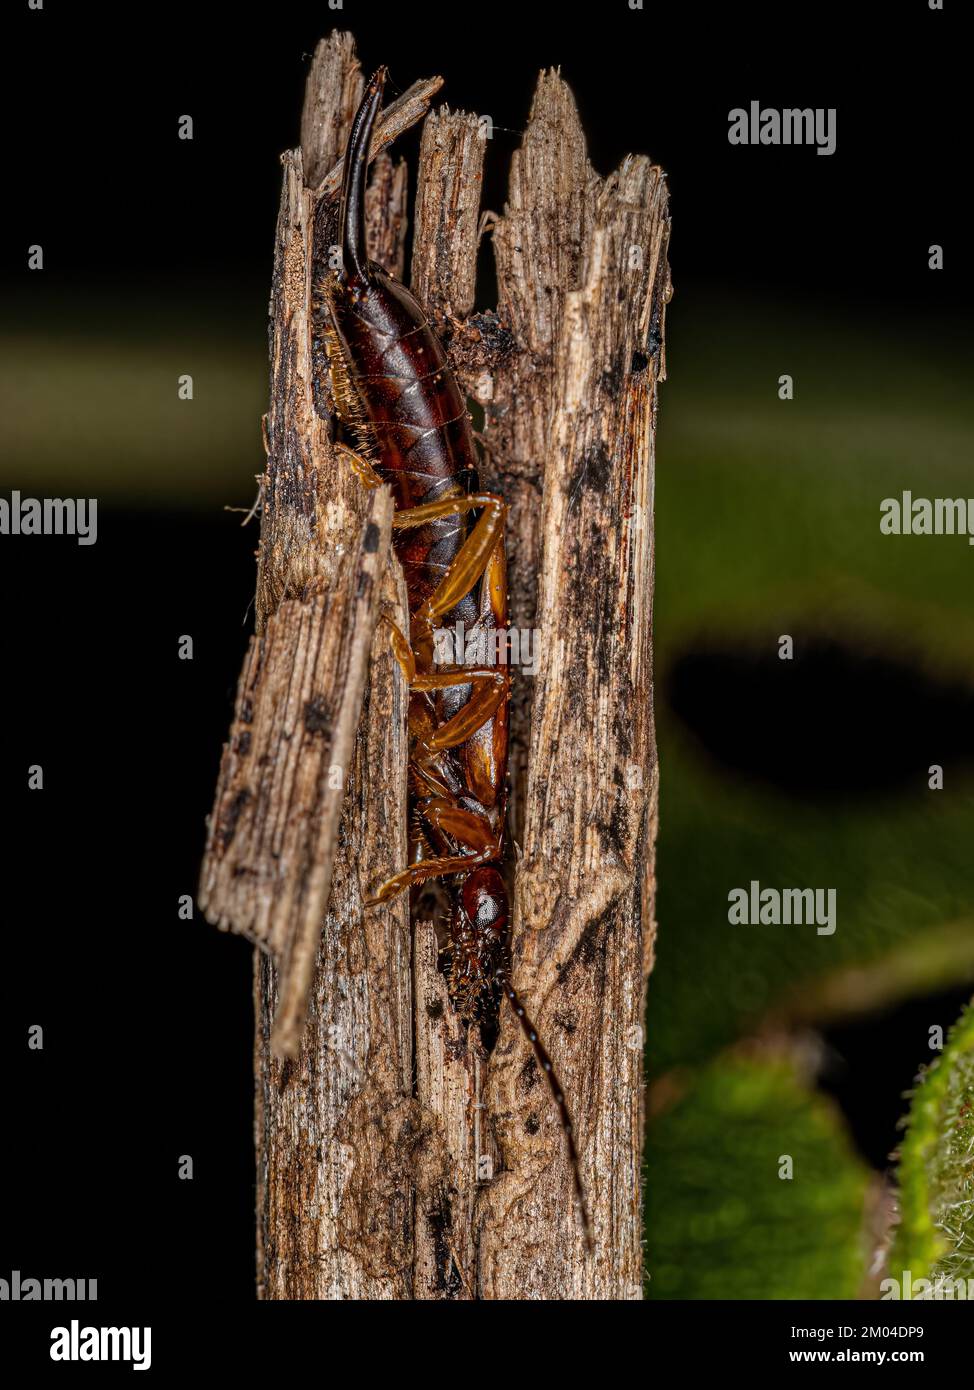 Adult Common Earwig of the order Dermaptera Stock Photo